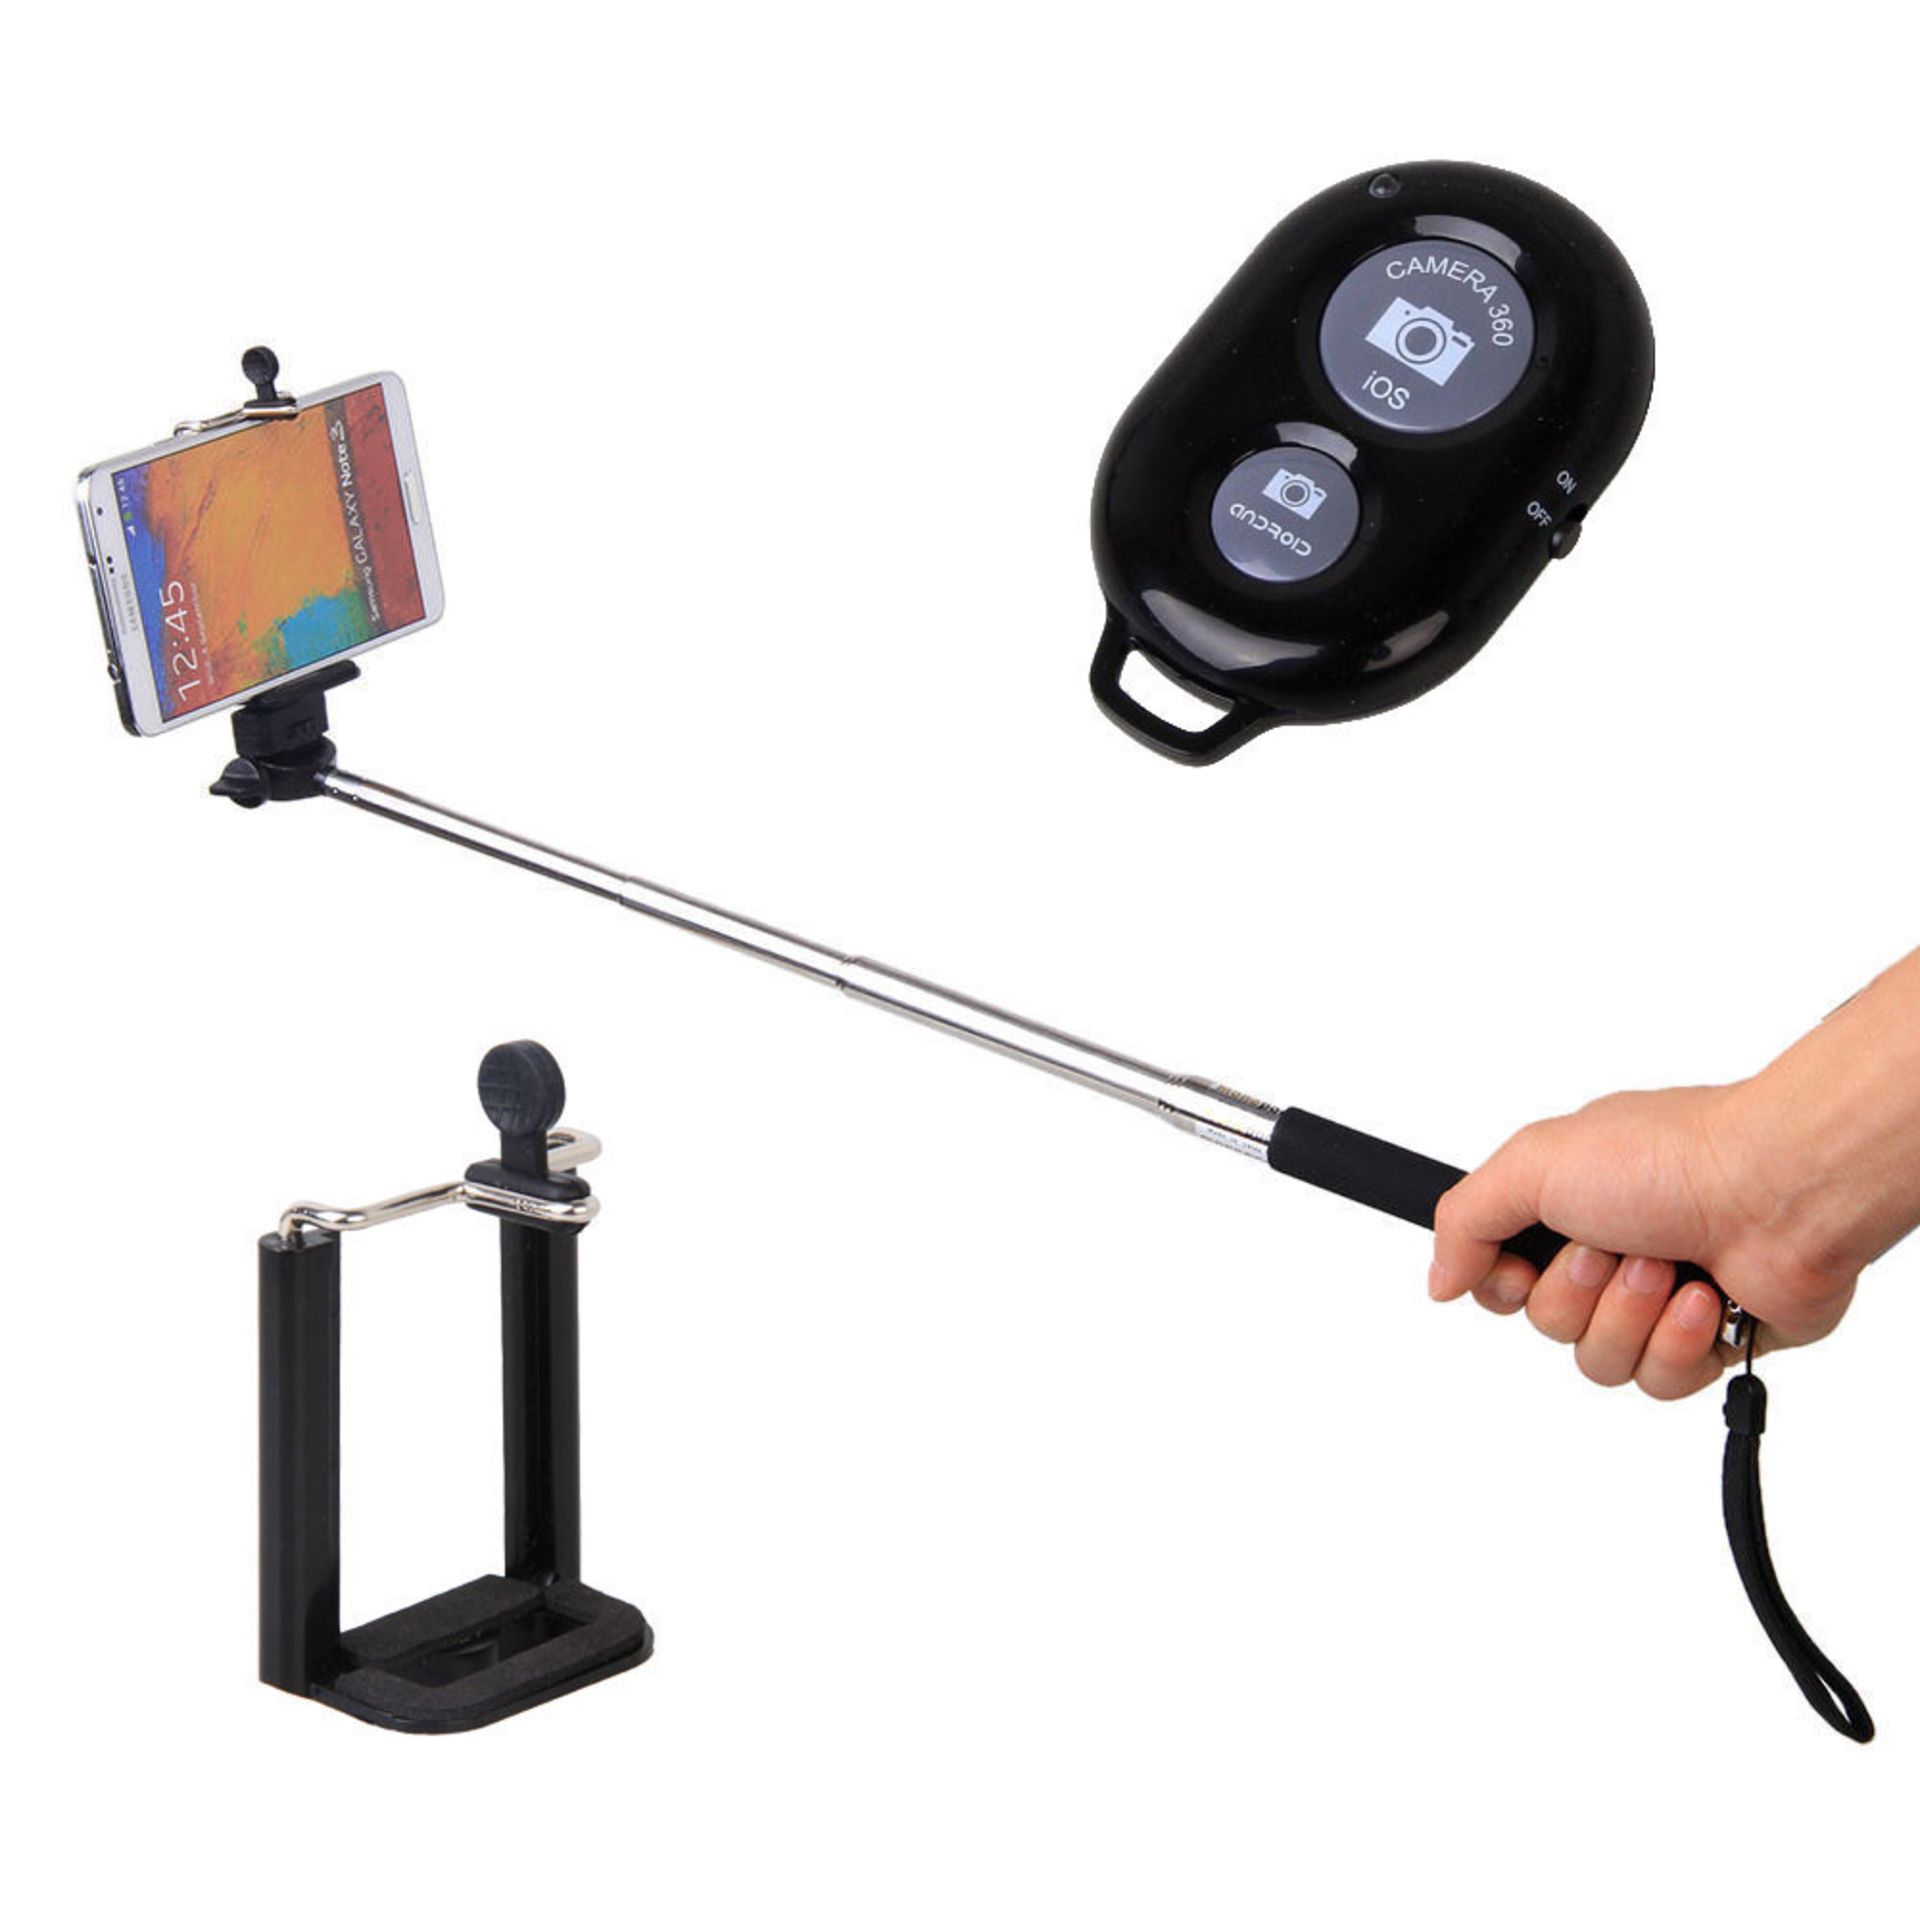 V Brand New Selfie Stick with Bluetooth Remote Control - RRP £19.09